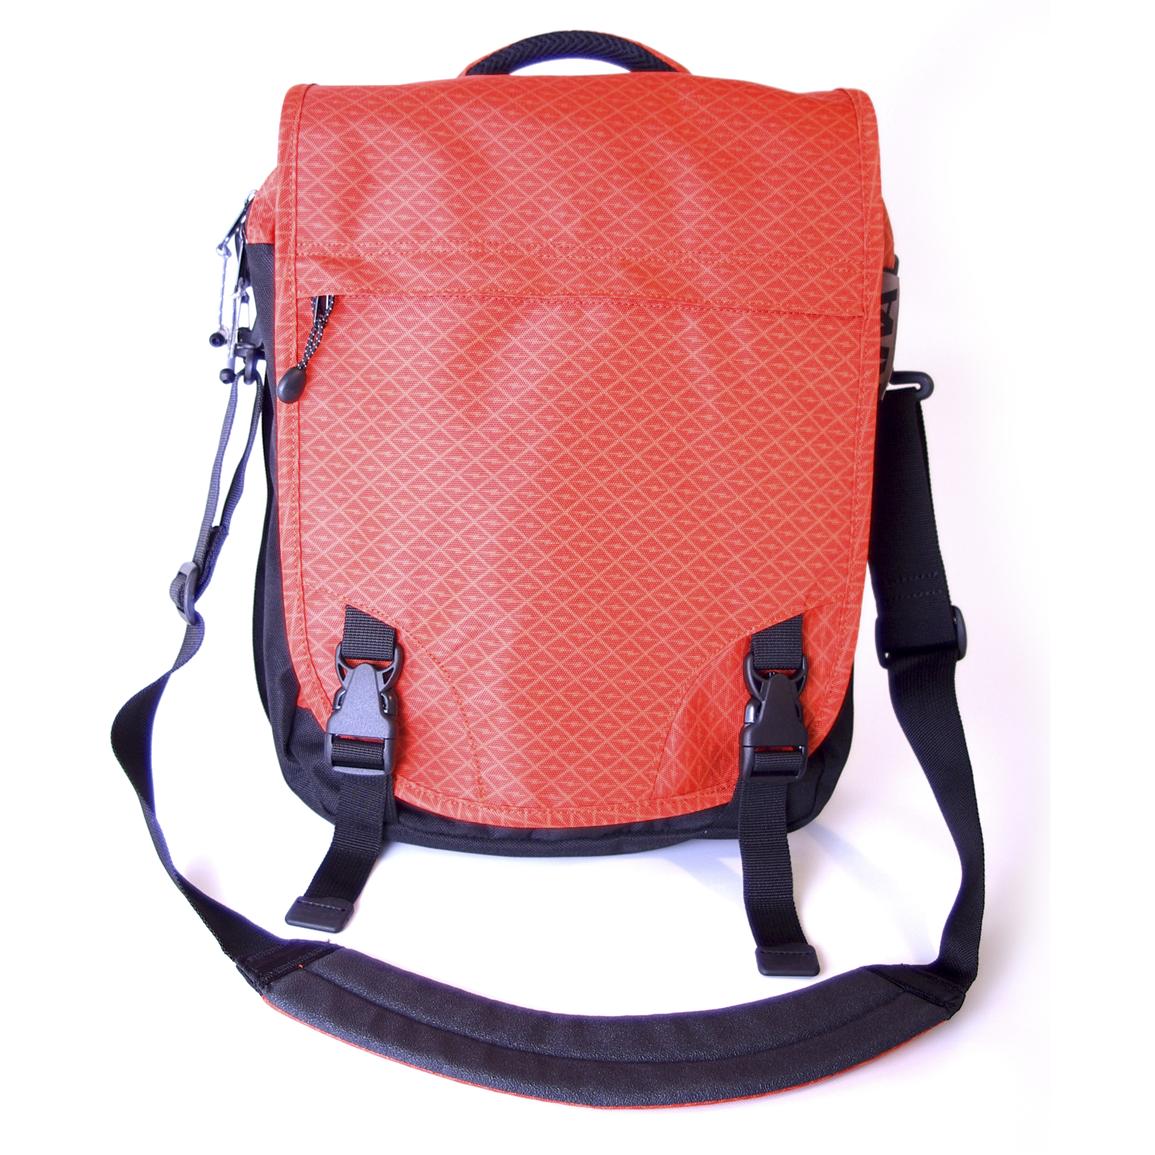 Kiva® Tour Vertical Brief - 204868, Tote Bags at Sportsman's Guide